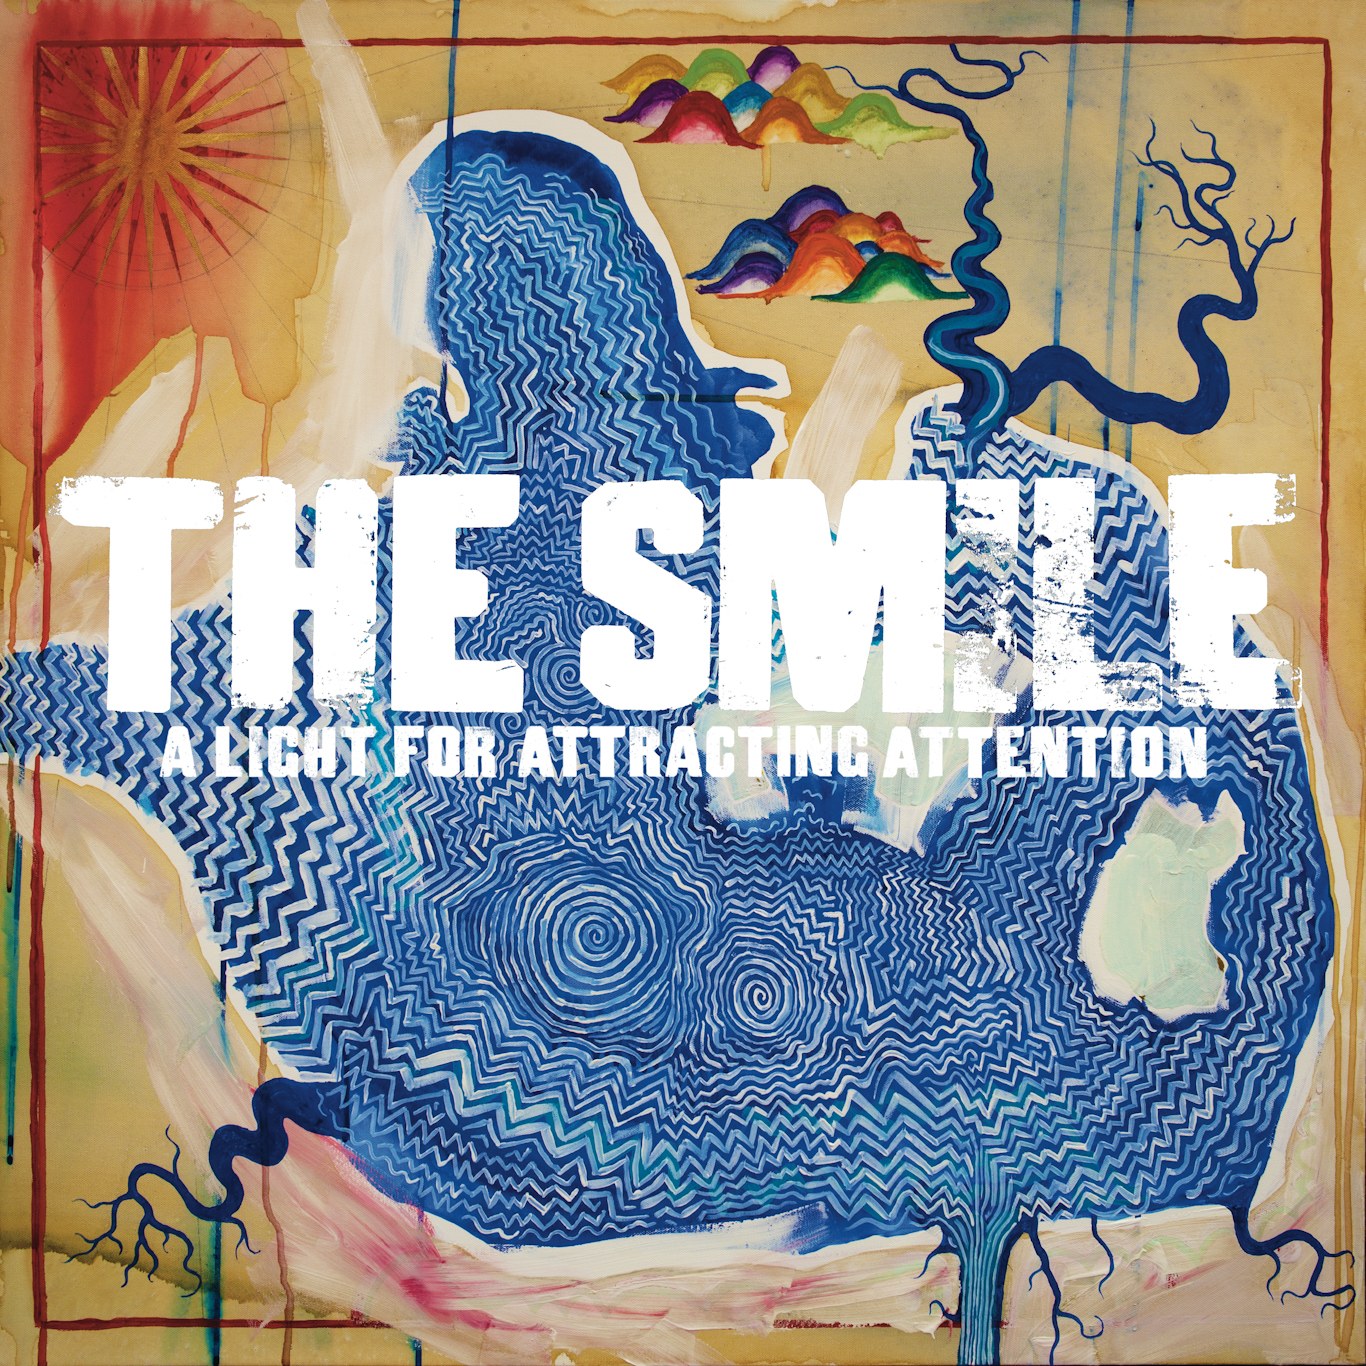 ALBUM REVIEW: The Smile - A Light For Attracting Attention 